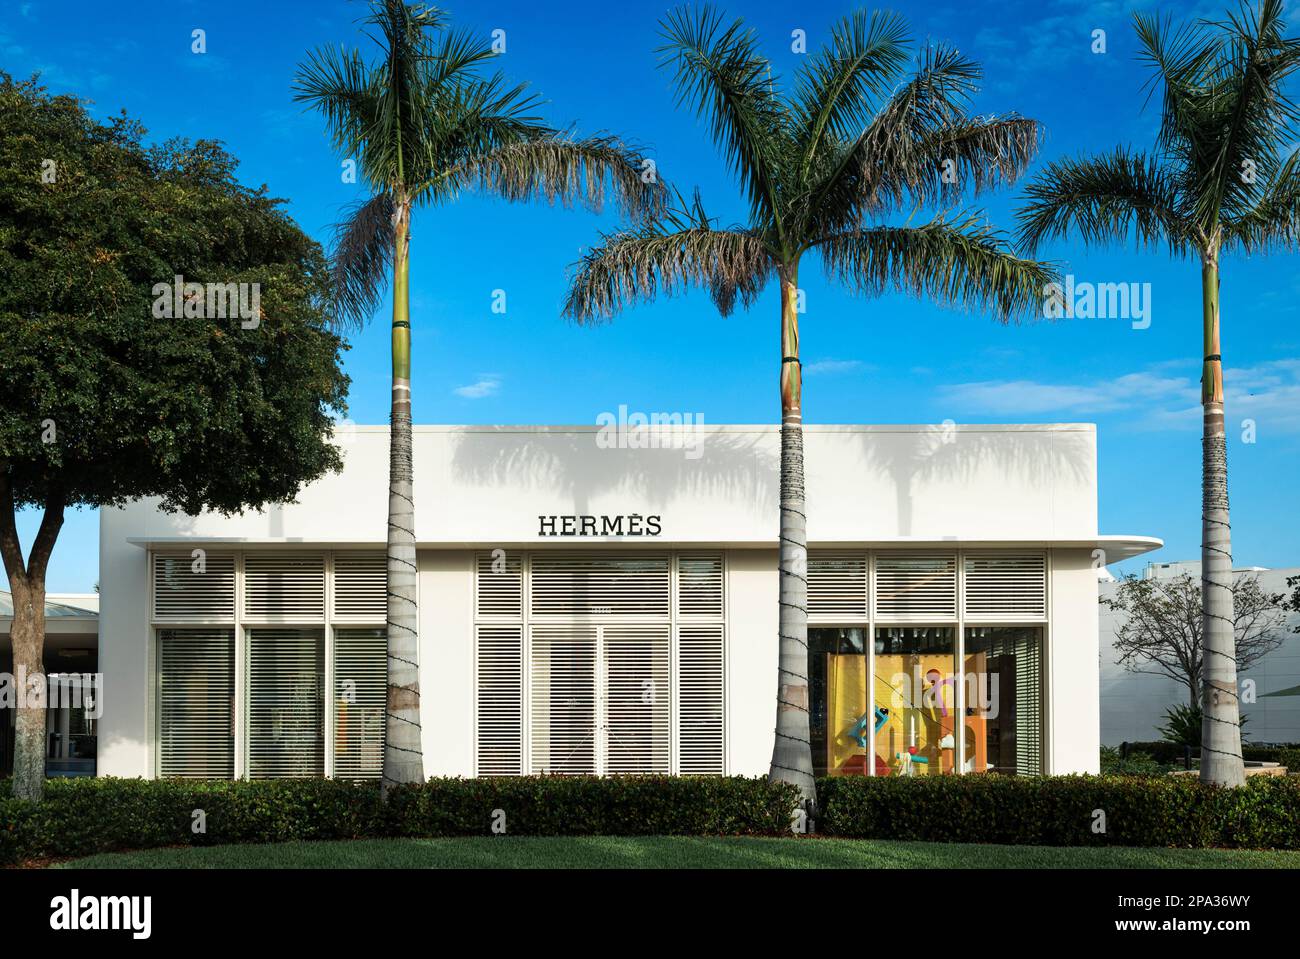 Waterside Shops Apple Store opens August 24th in Naples, Florida